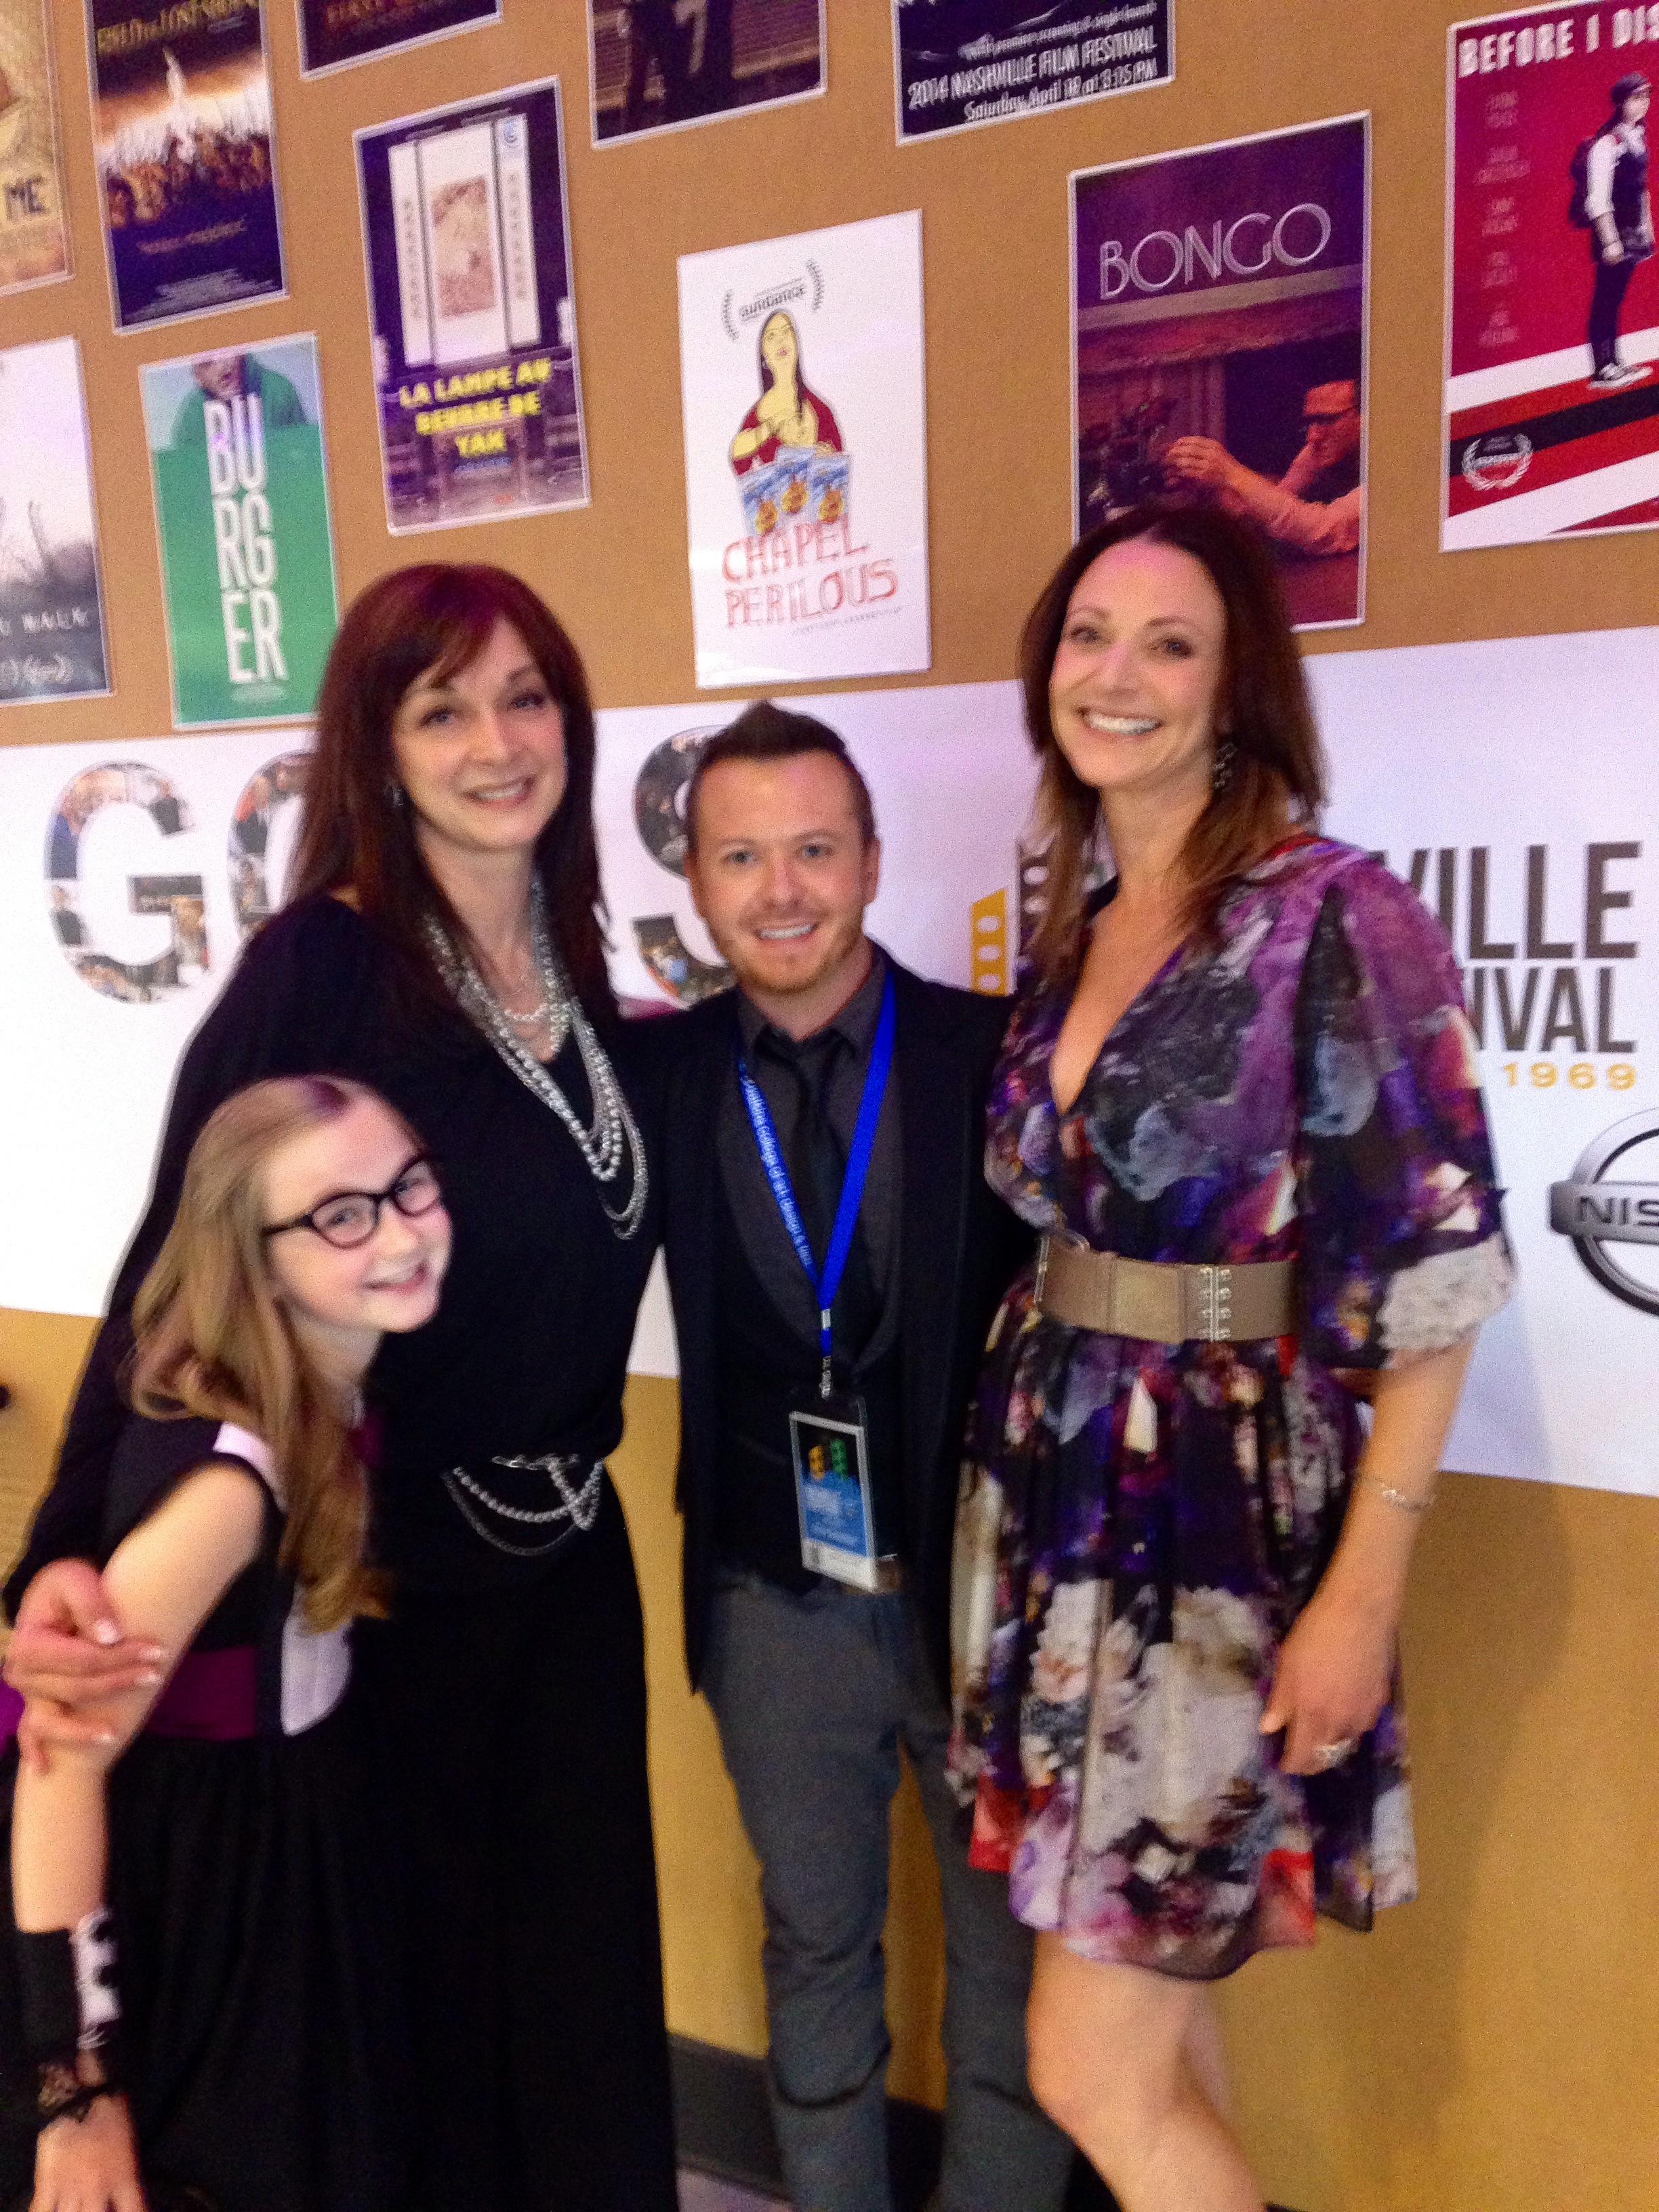 Nashville Film Festival 2013 CHASING GHOSTS with Meyrick Murphy, Rebecca Lines and PR Matthew Grant